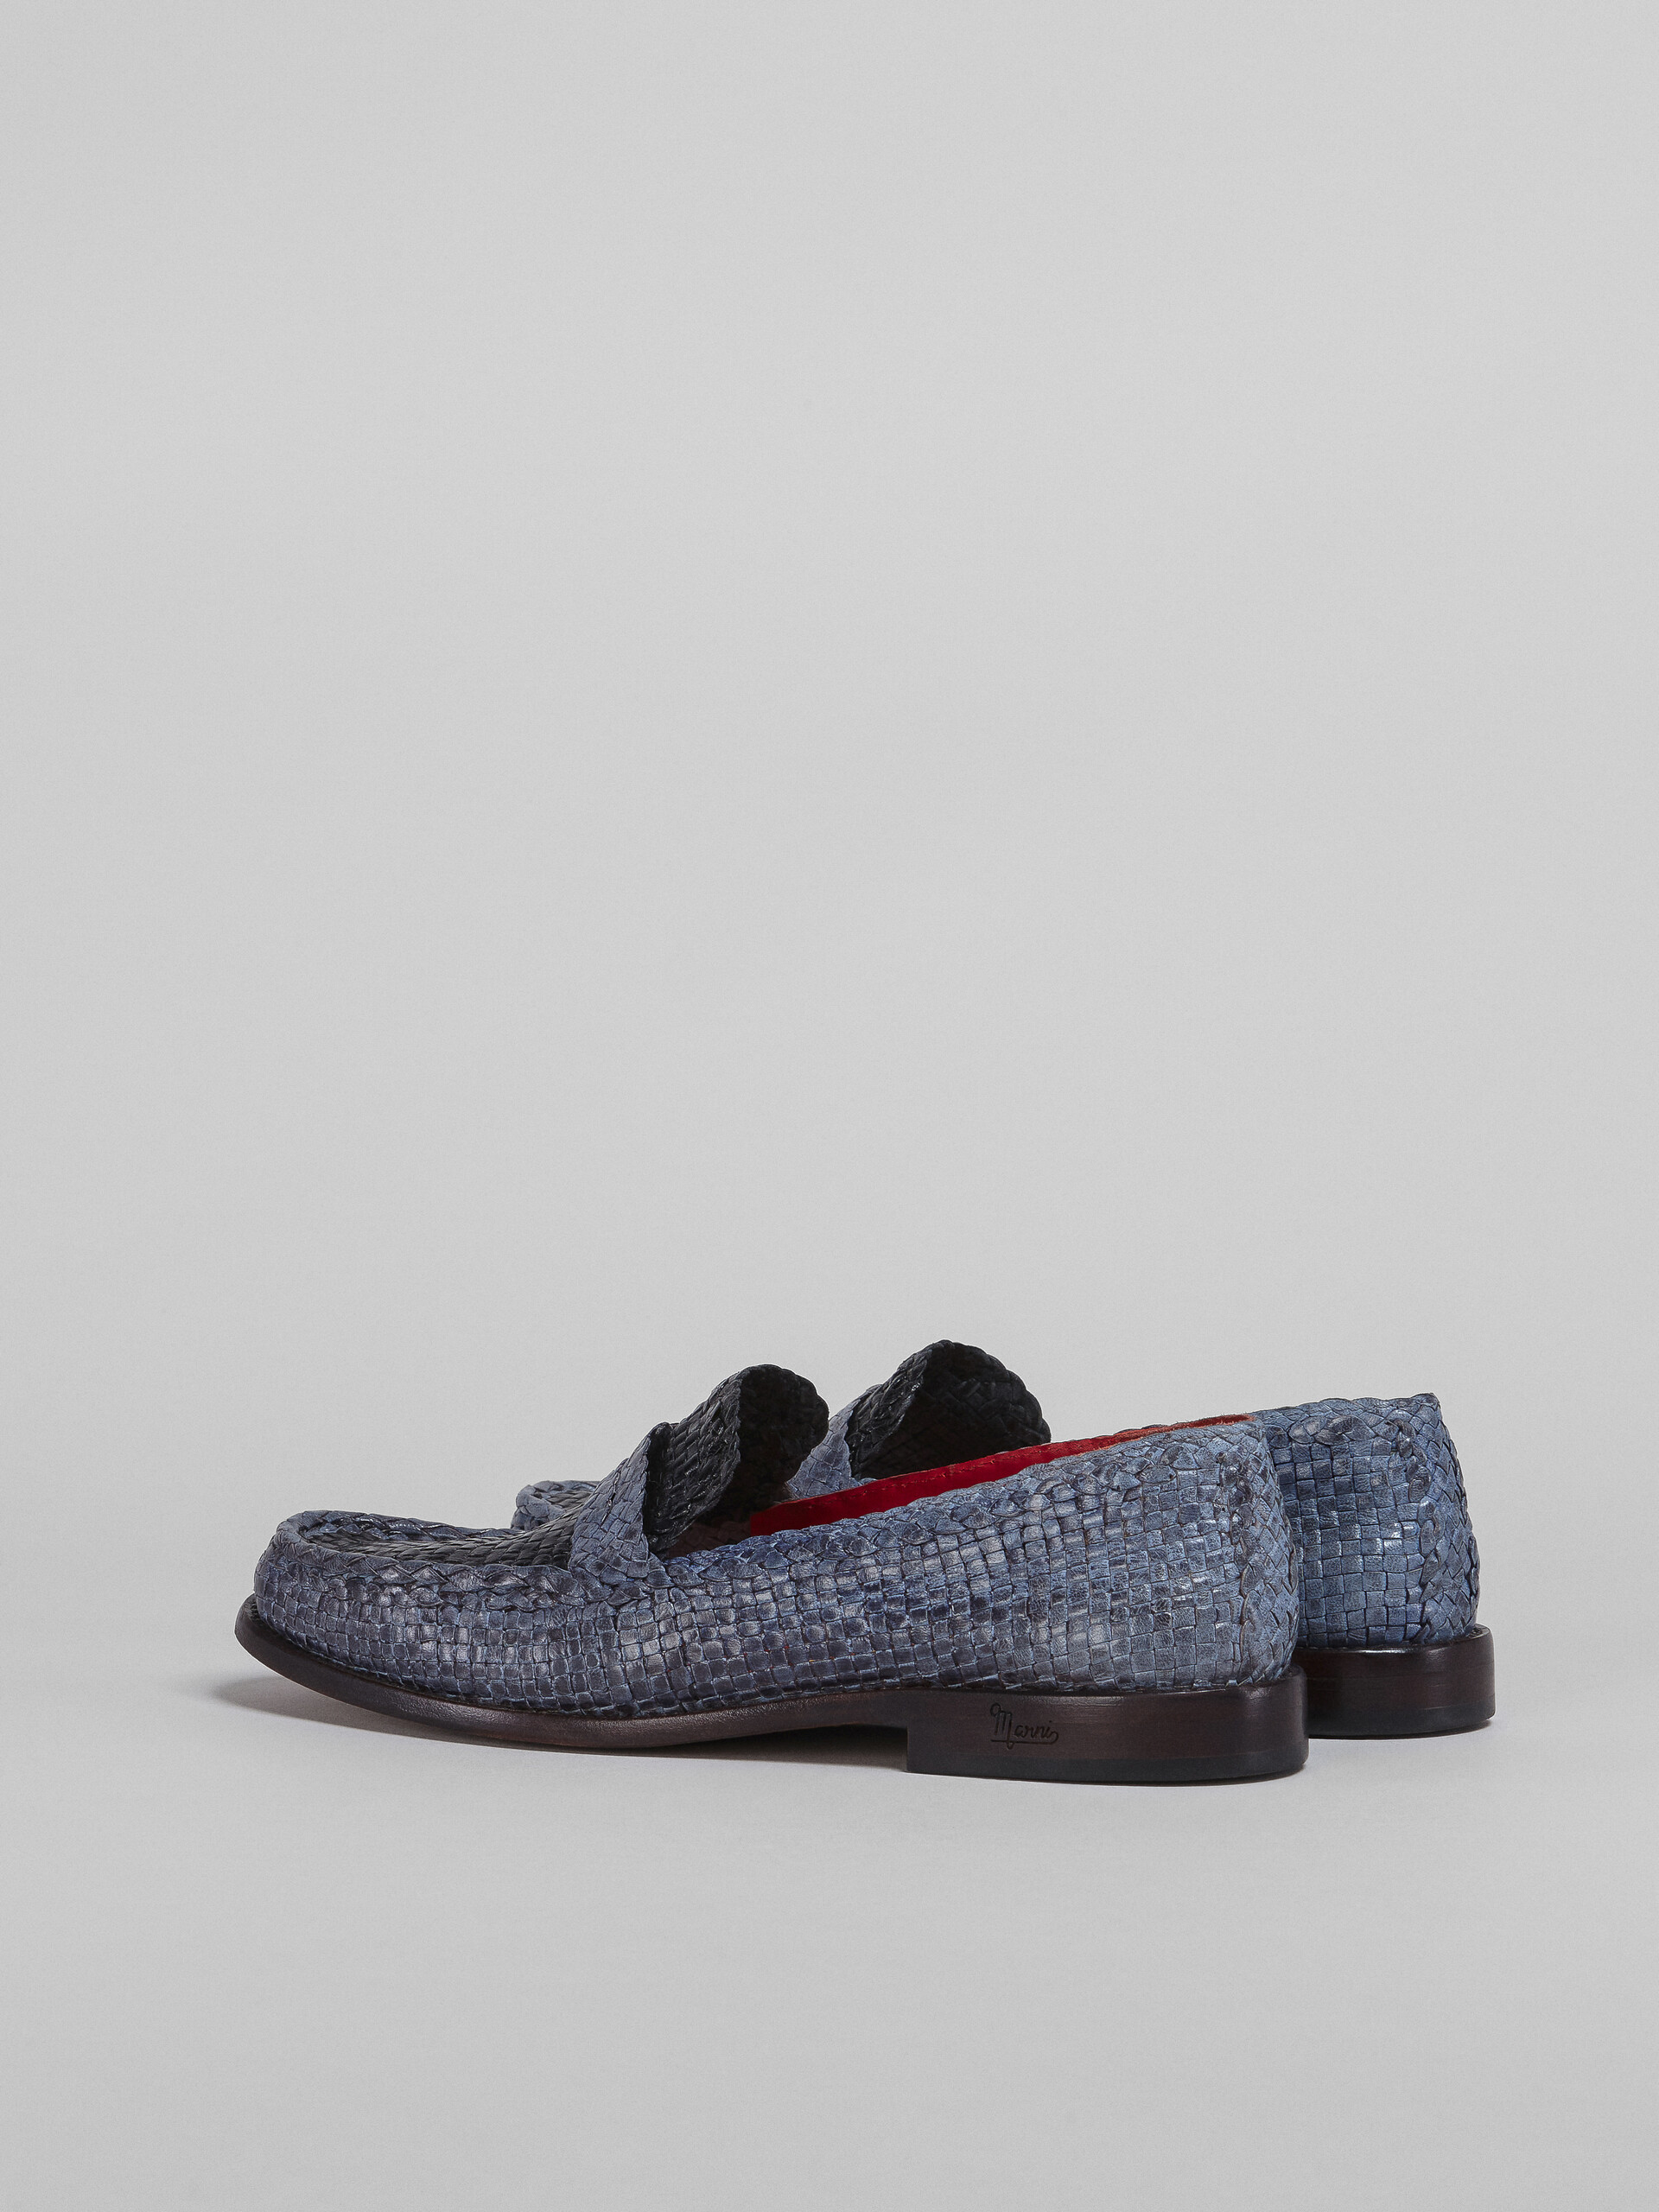 Black and blue woven leather moccasin - Mocassin - Image 3